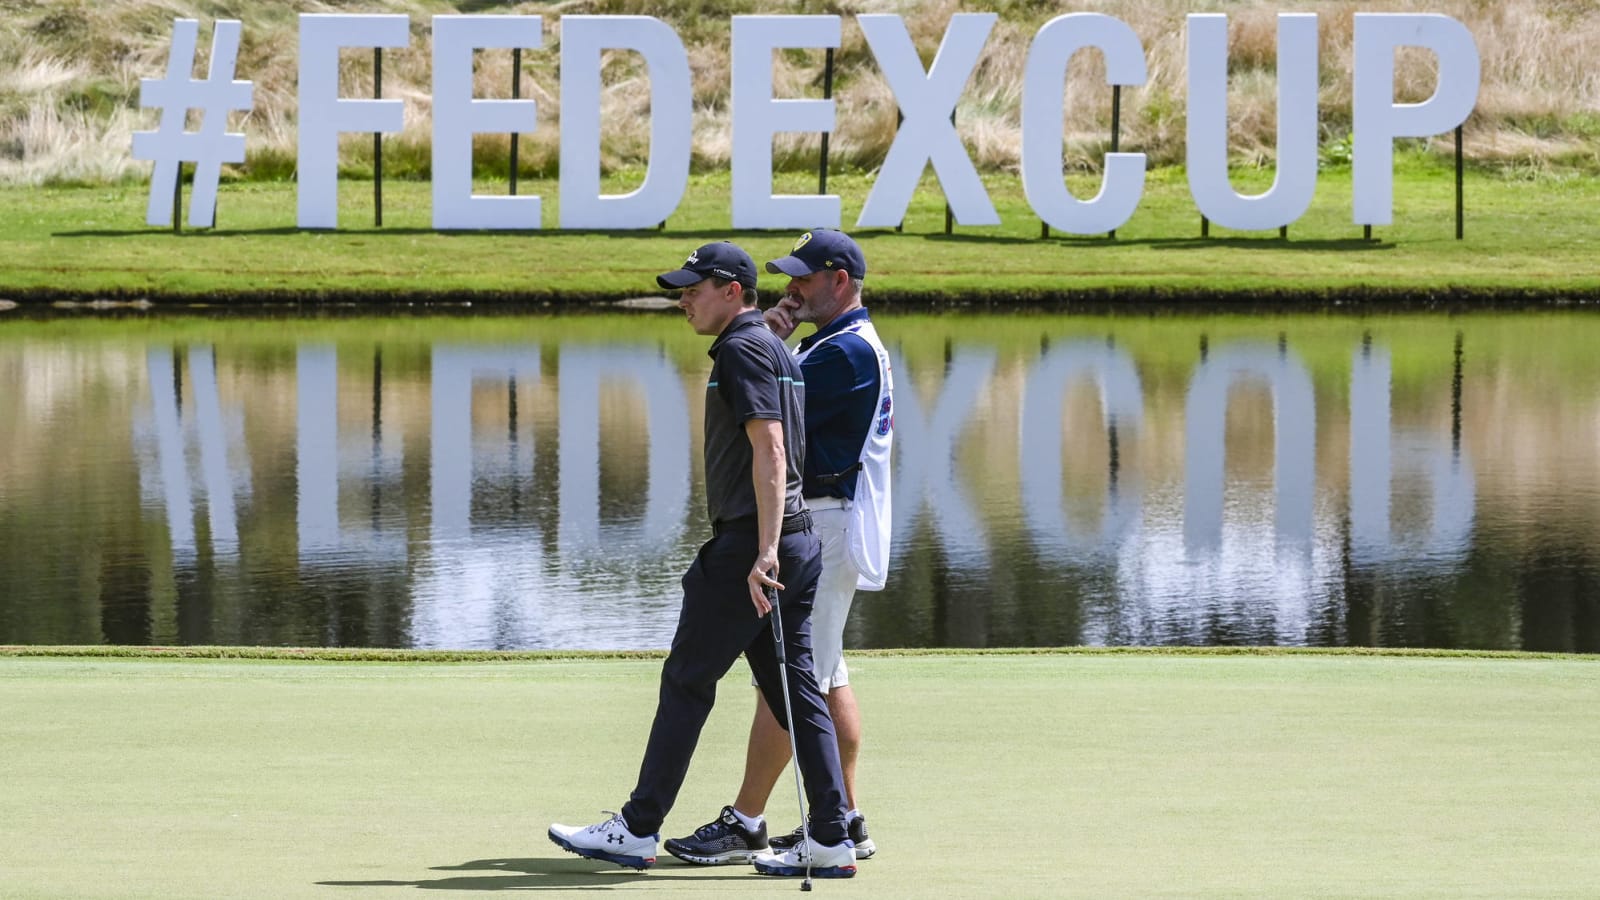 15 storylines heading into the FedExCup